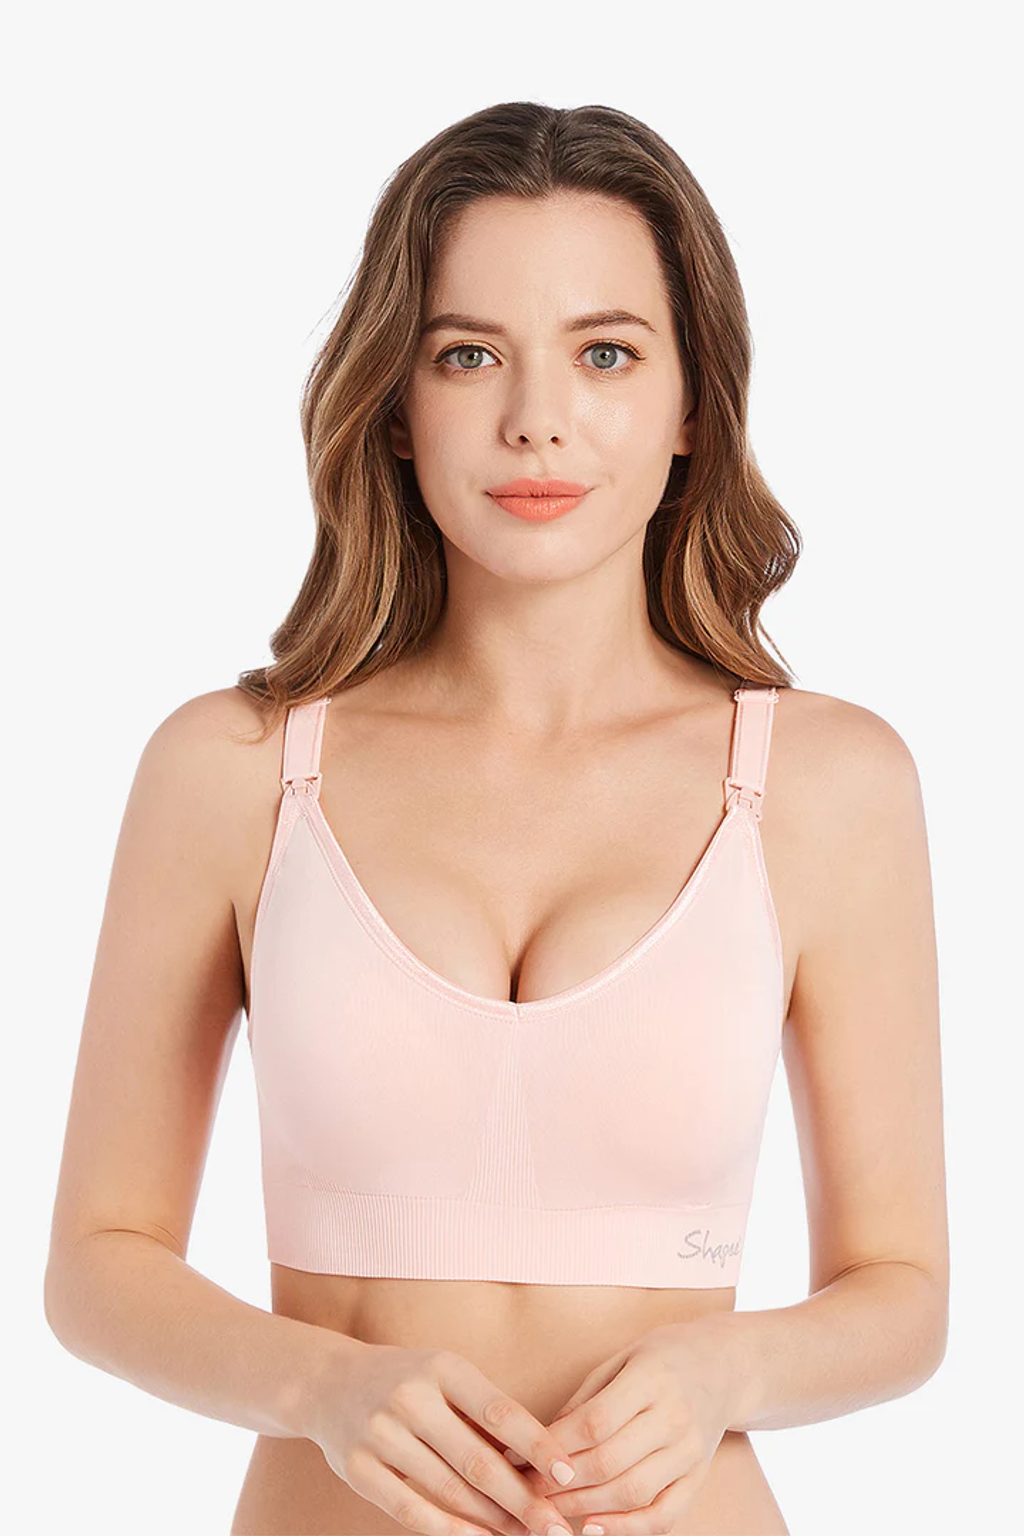 LUXE_shopify_pink_720x